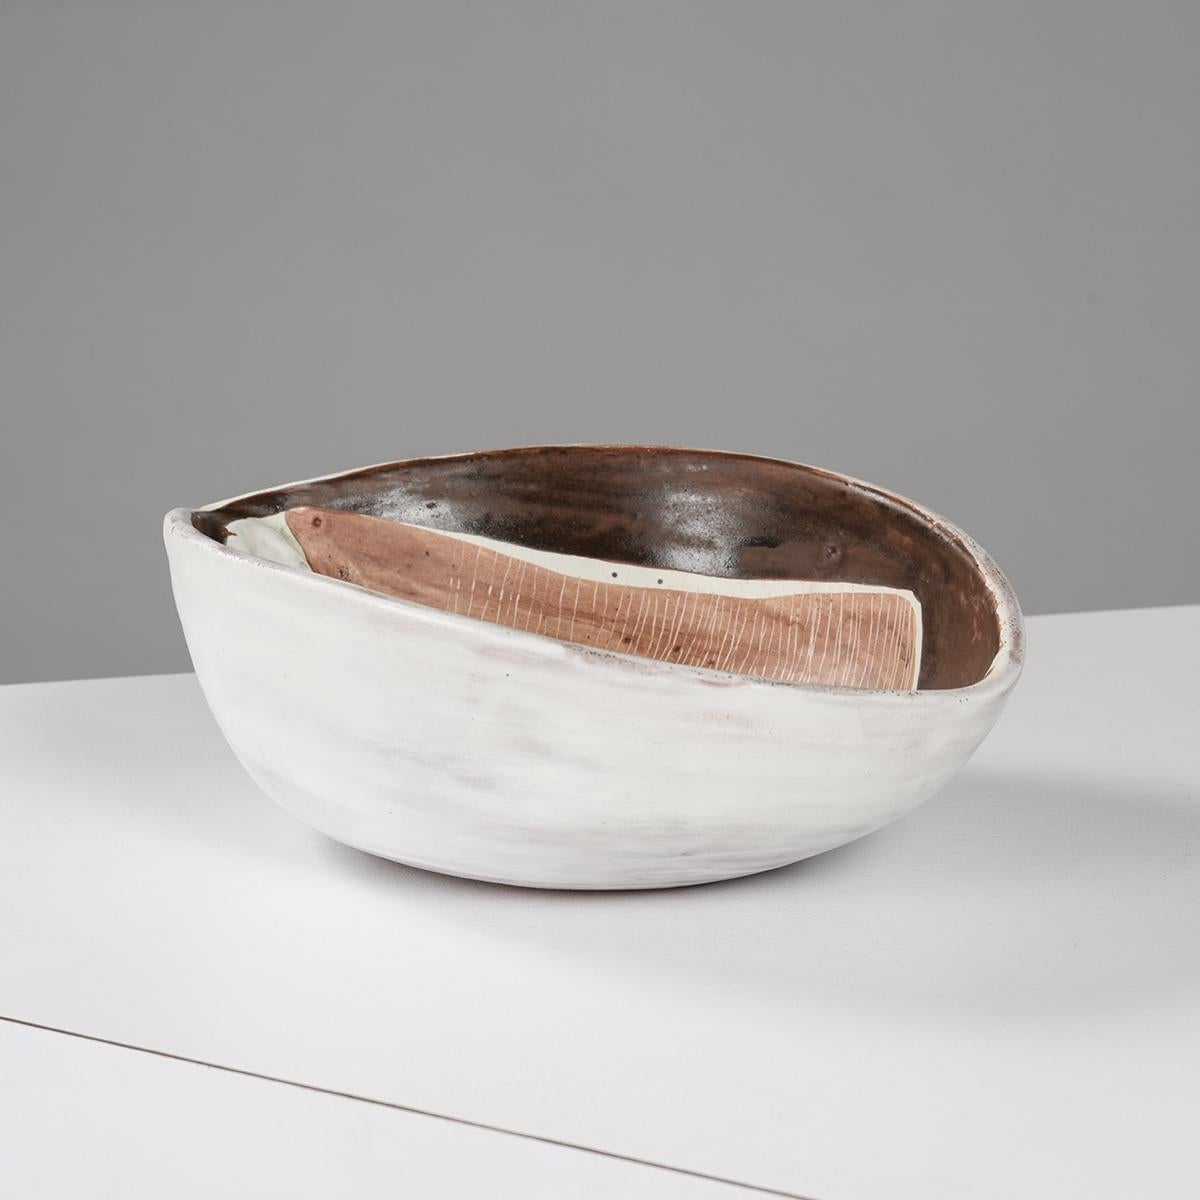 Large bowl cup by Mado Jolain, French ceramist active from 1946 to 1970, with remarkable work of textures, simple and strict shapes and thick and shiny enamels which give her artworks great modernity.

Slightly oval, the cup is animated by a